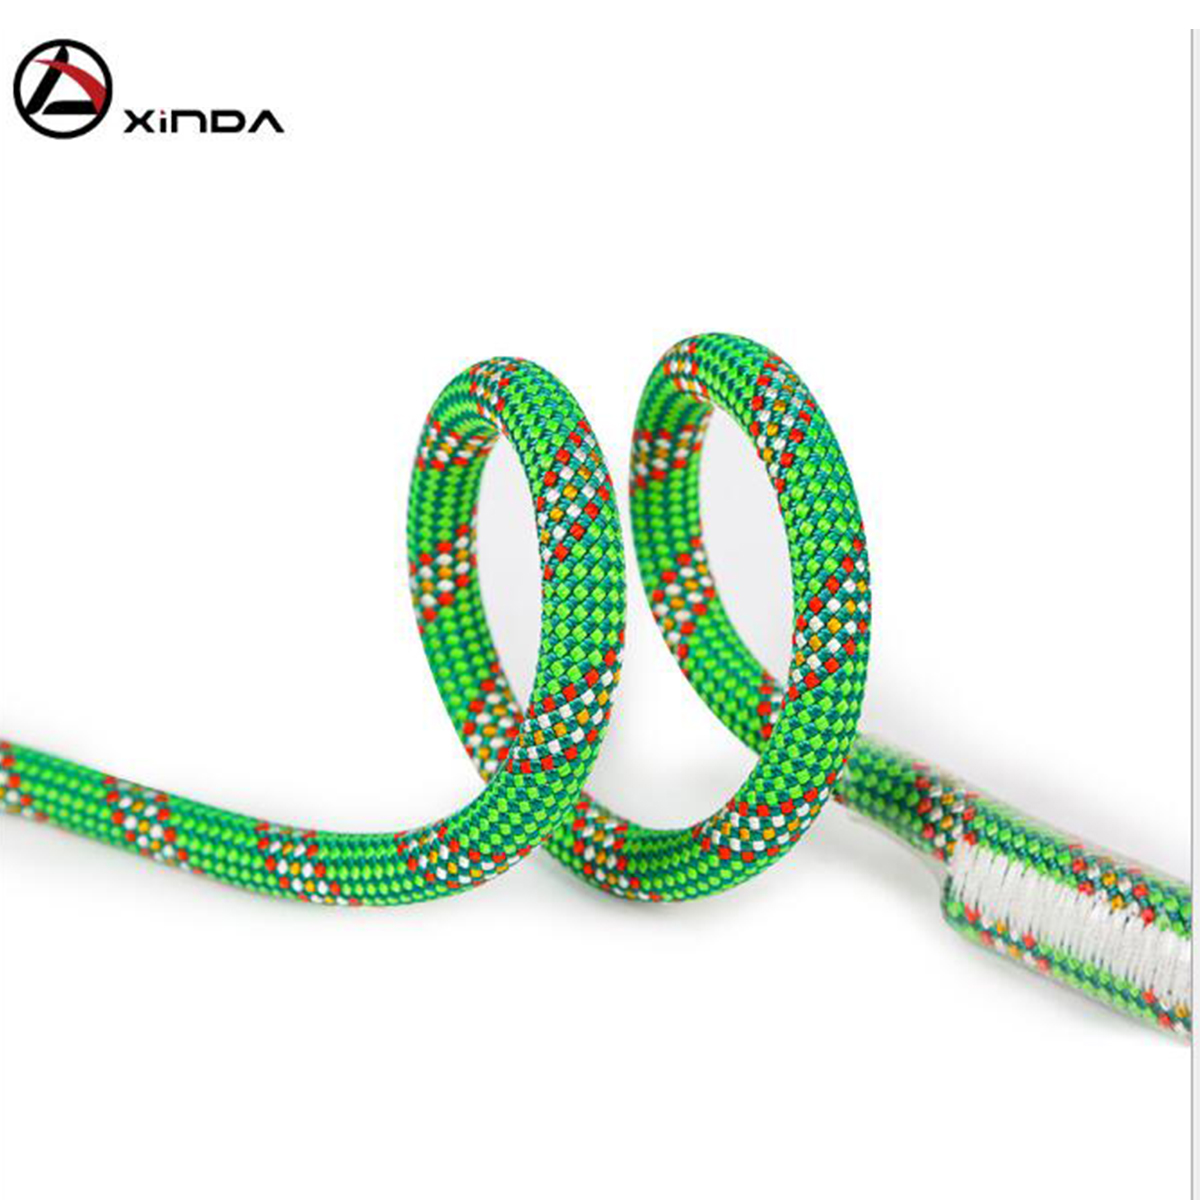 Xinda-105mm-80100120150cm-Professional-Rock-Climbing-Rope-Supplies-High-Altitude-Anti-Fall-Off-Prote-1570418-6